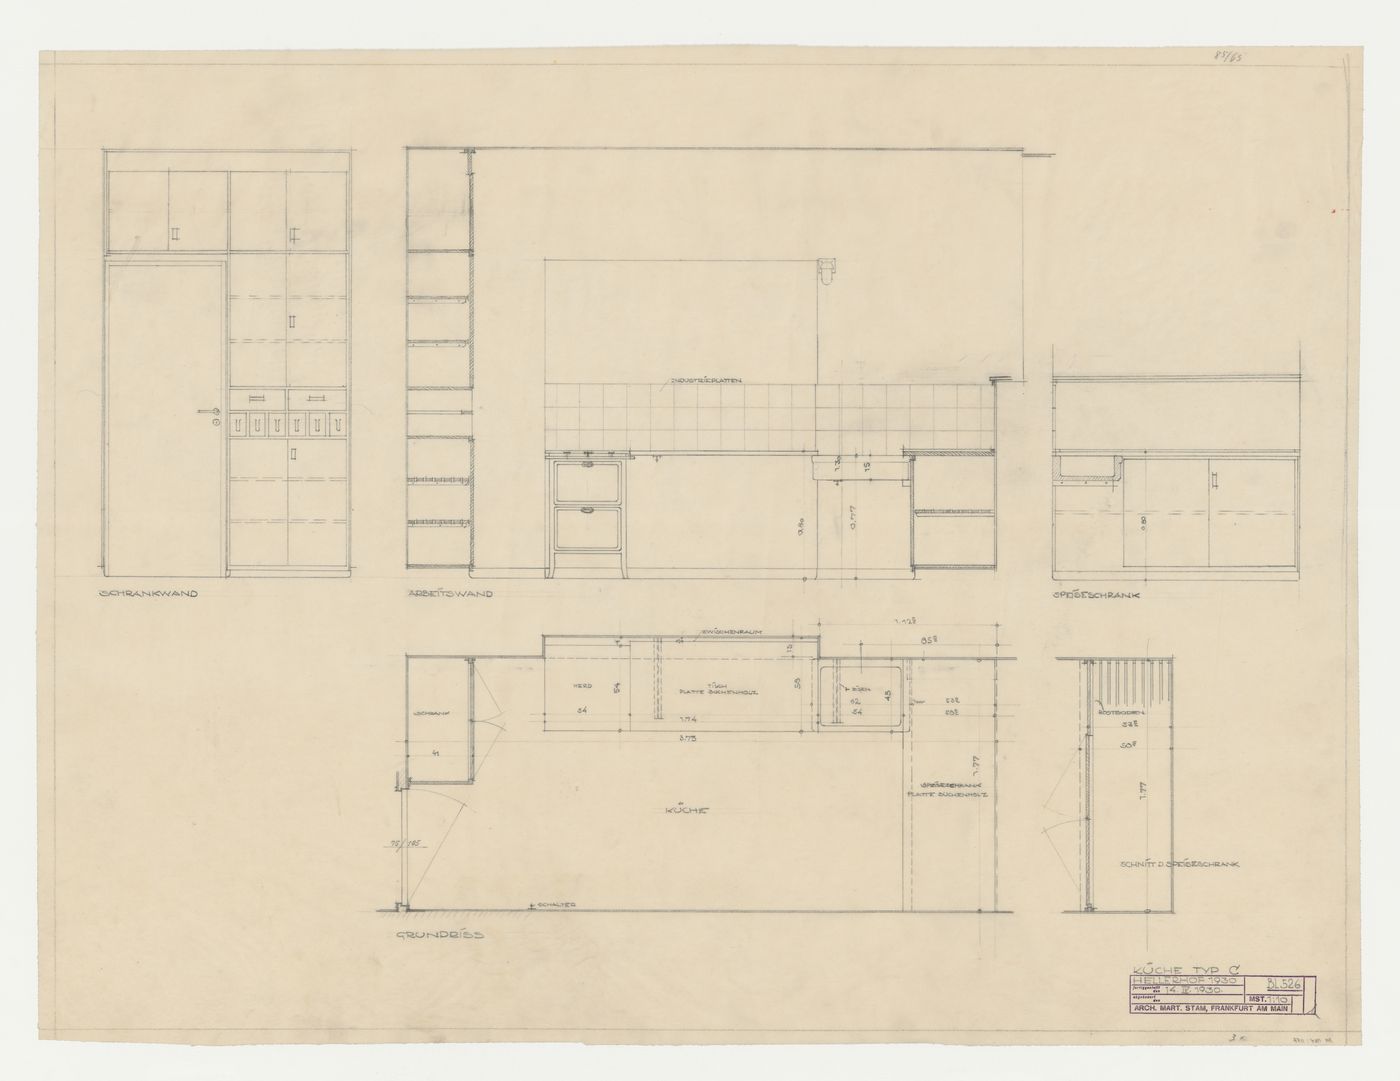 Plan and elevations for a type C kitchen, Hellerhof Housing Estate, Frankfurt am Main, Germany